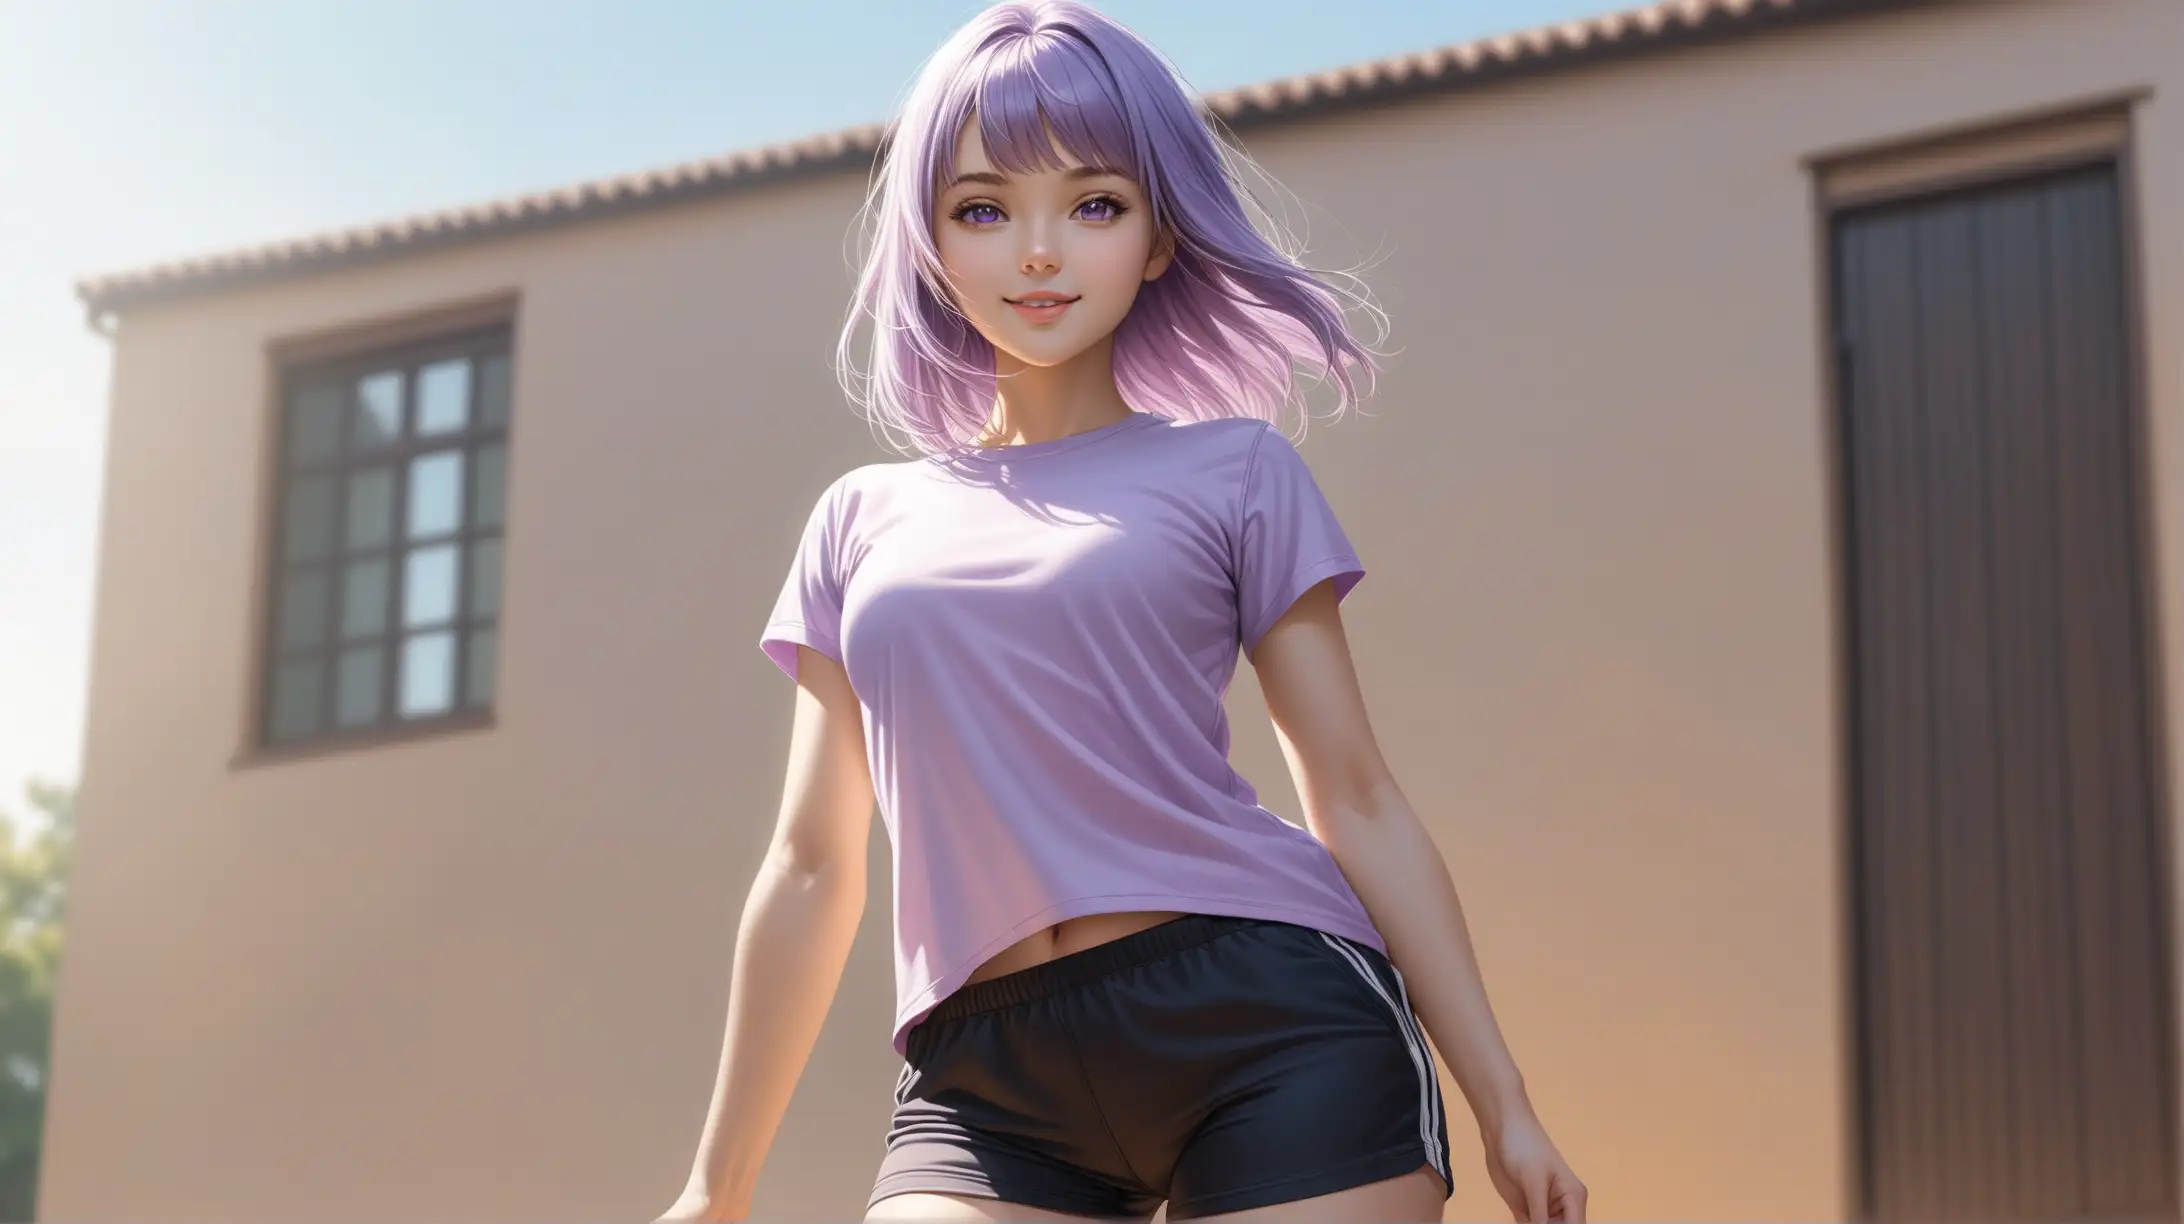 Draw a woman, shoulder length light purple hair, messy bangs framing her face, light purple eyes, petite figure, high quality, realistic, accurate, detailed, low angle shot, outdoors, standing, full body, natural lighting, seductive pose, athletic shorts and t-shirt, smiling at the viewer